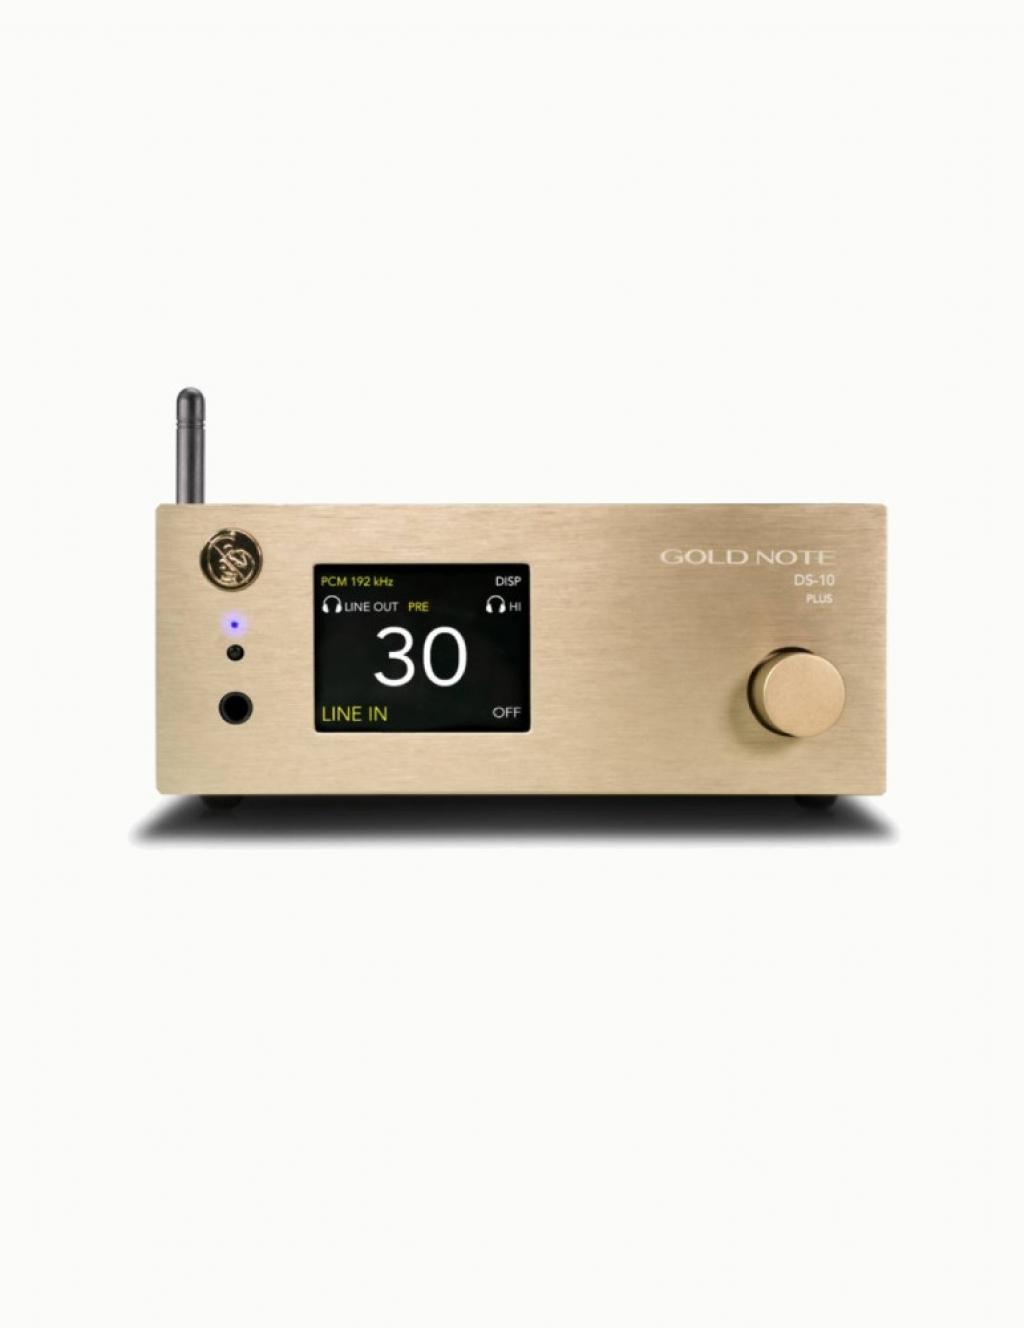 DAC Gold Note DS-10 Plus